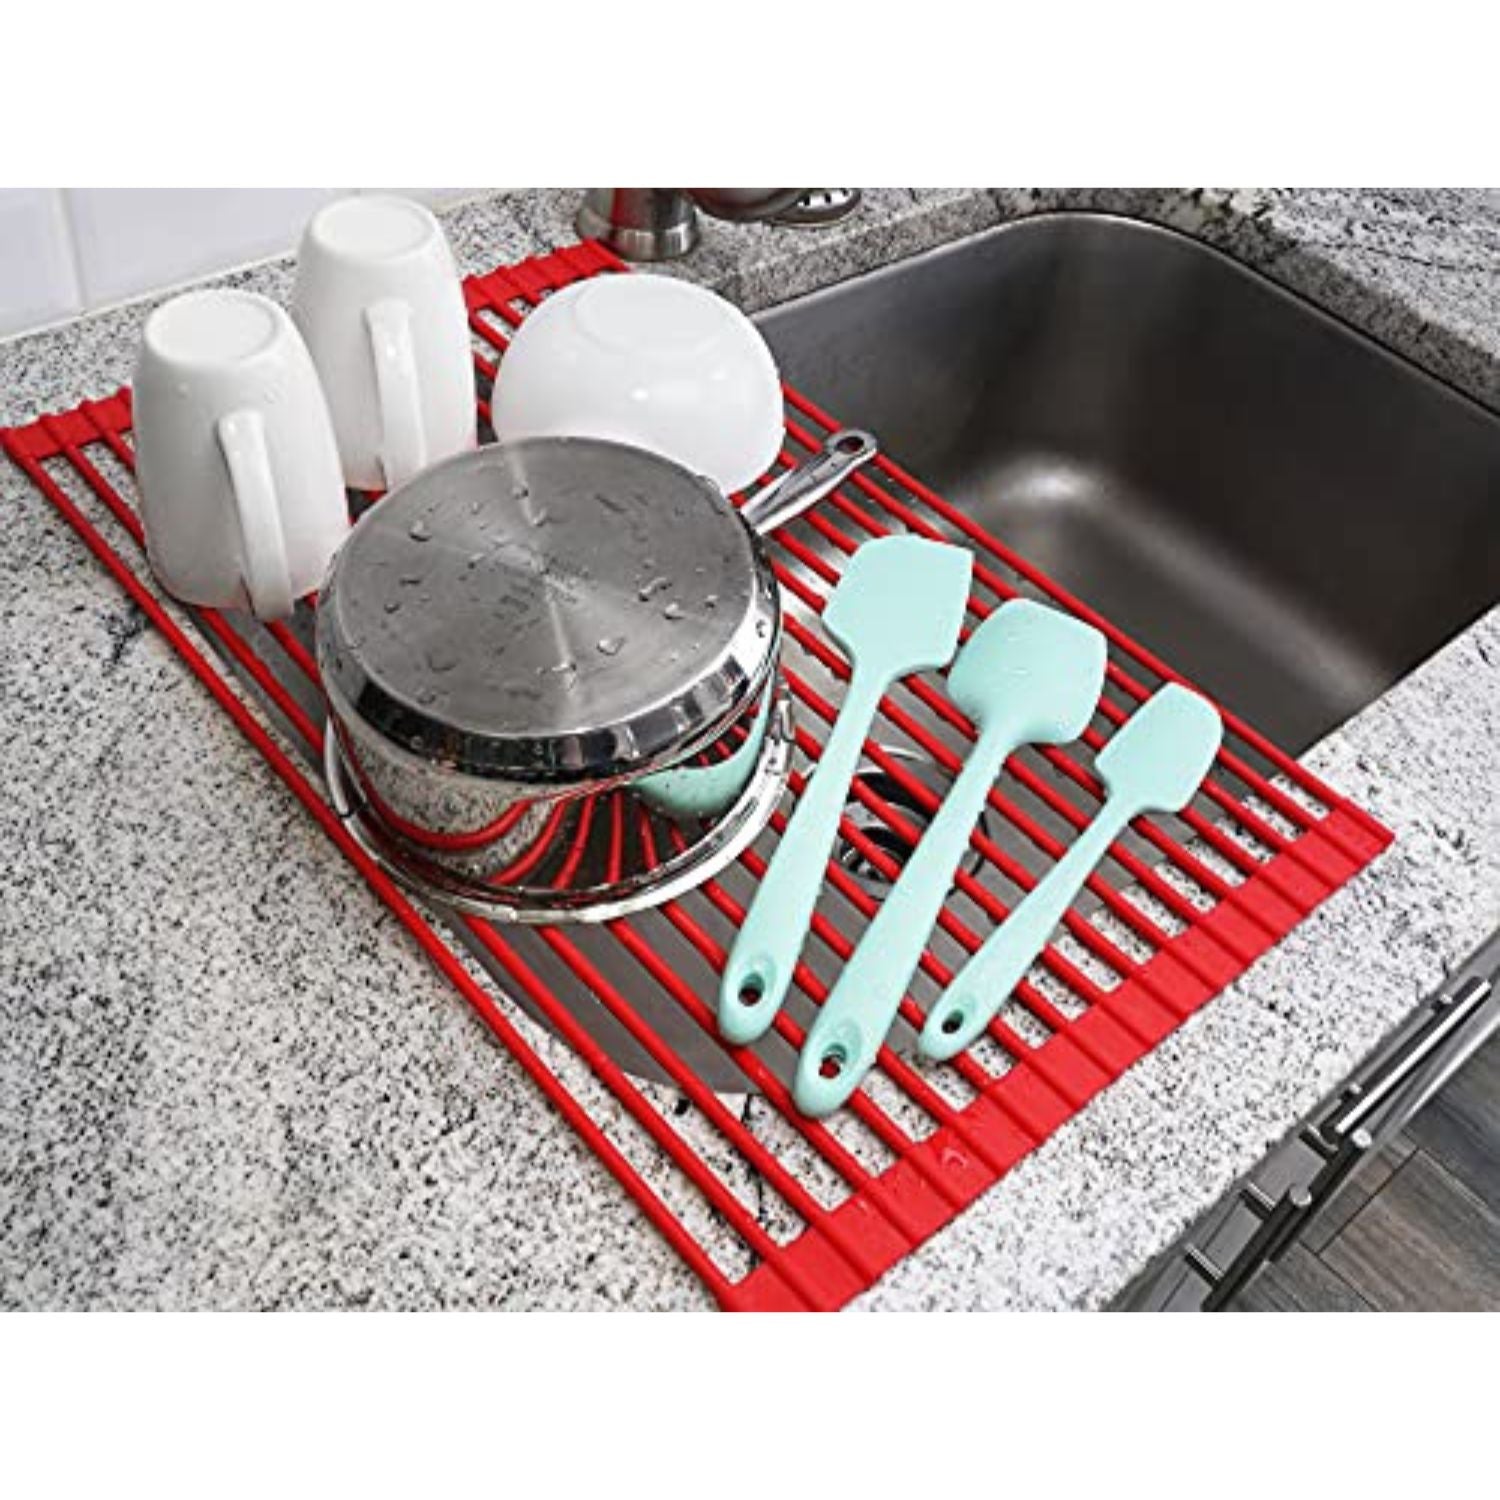 Roll Up Sink Cover